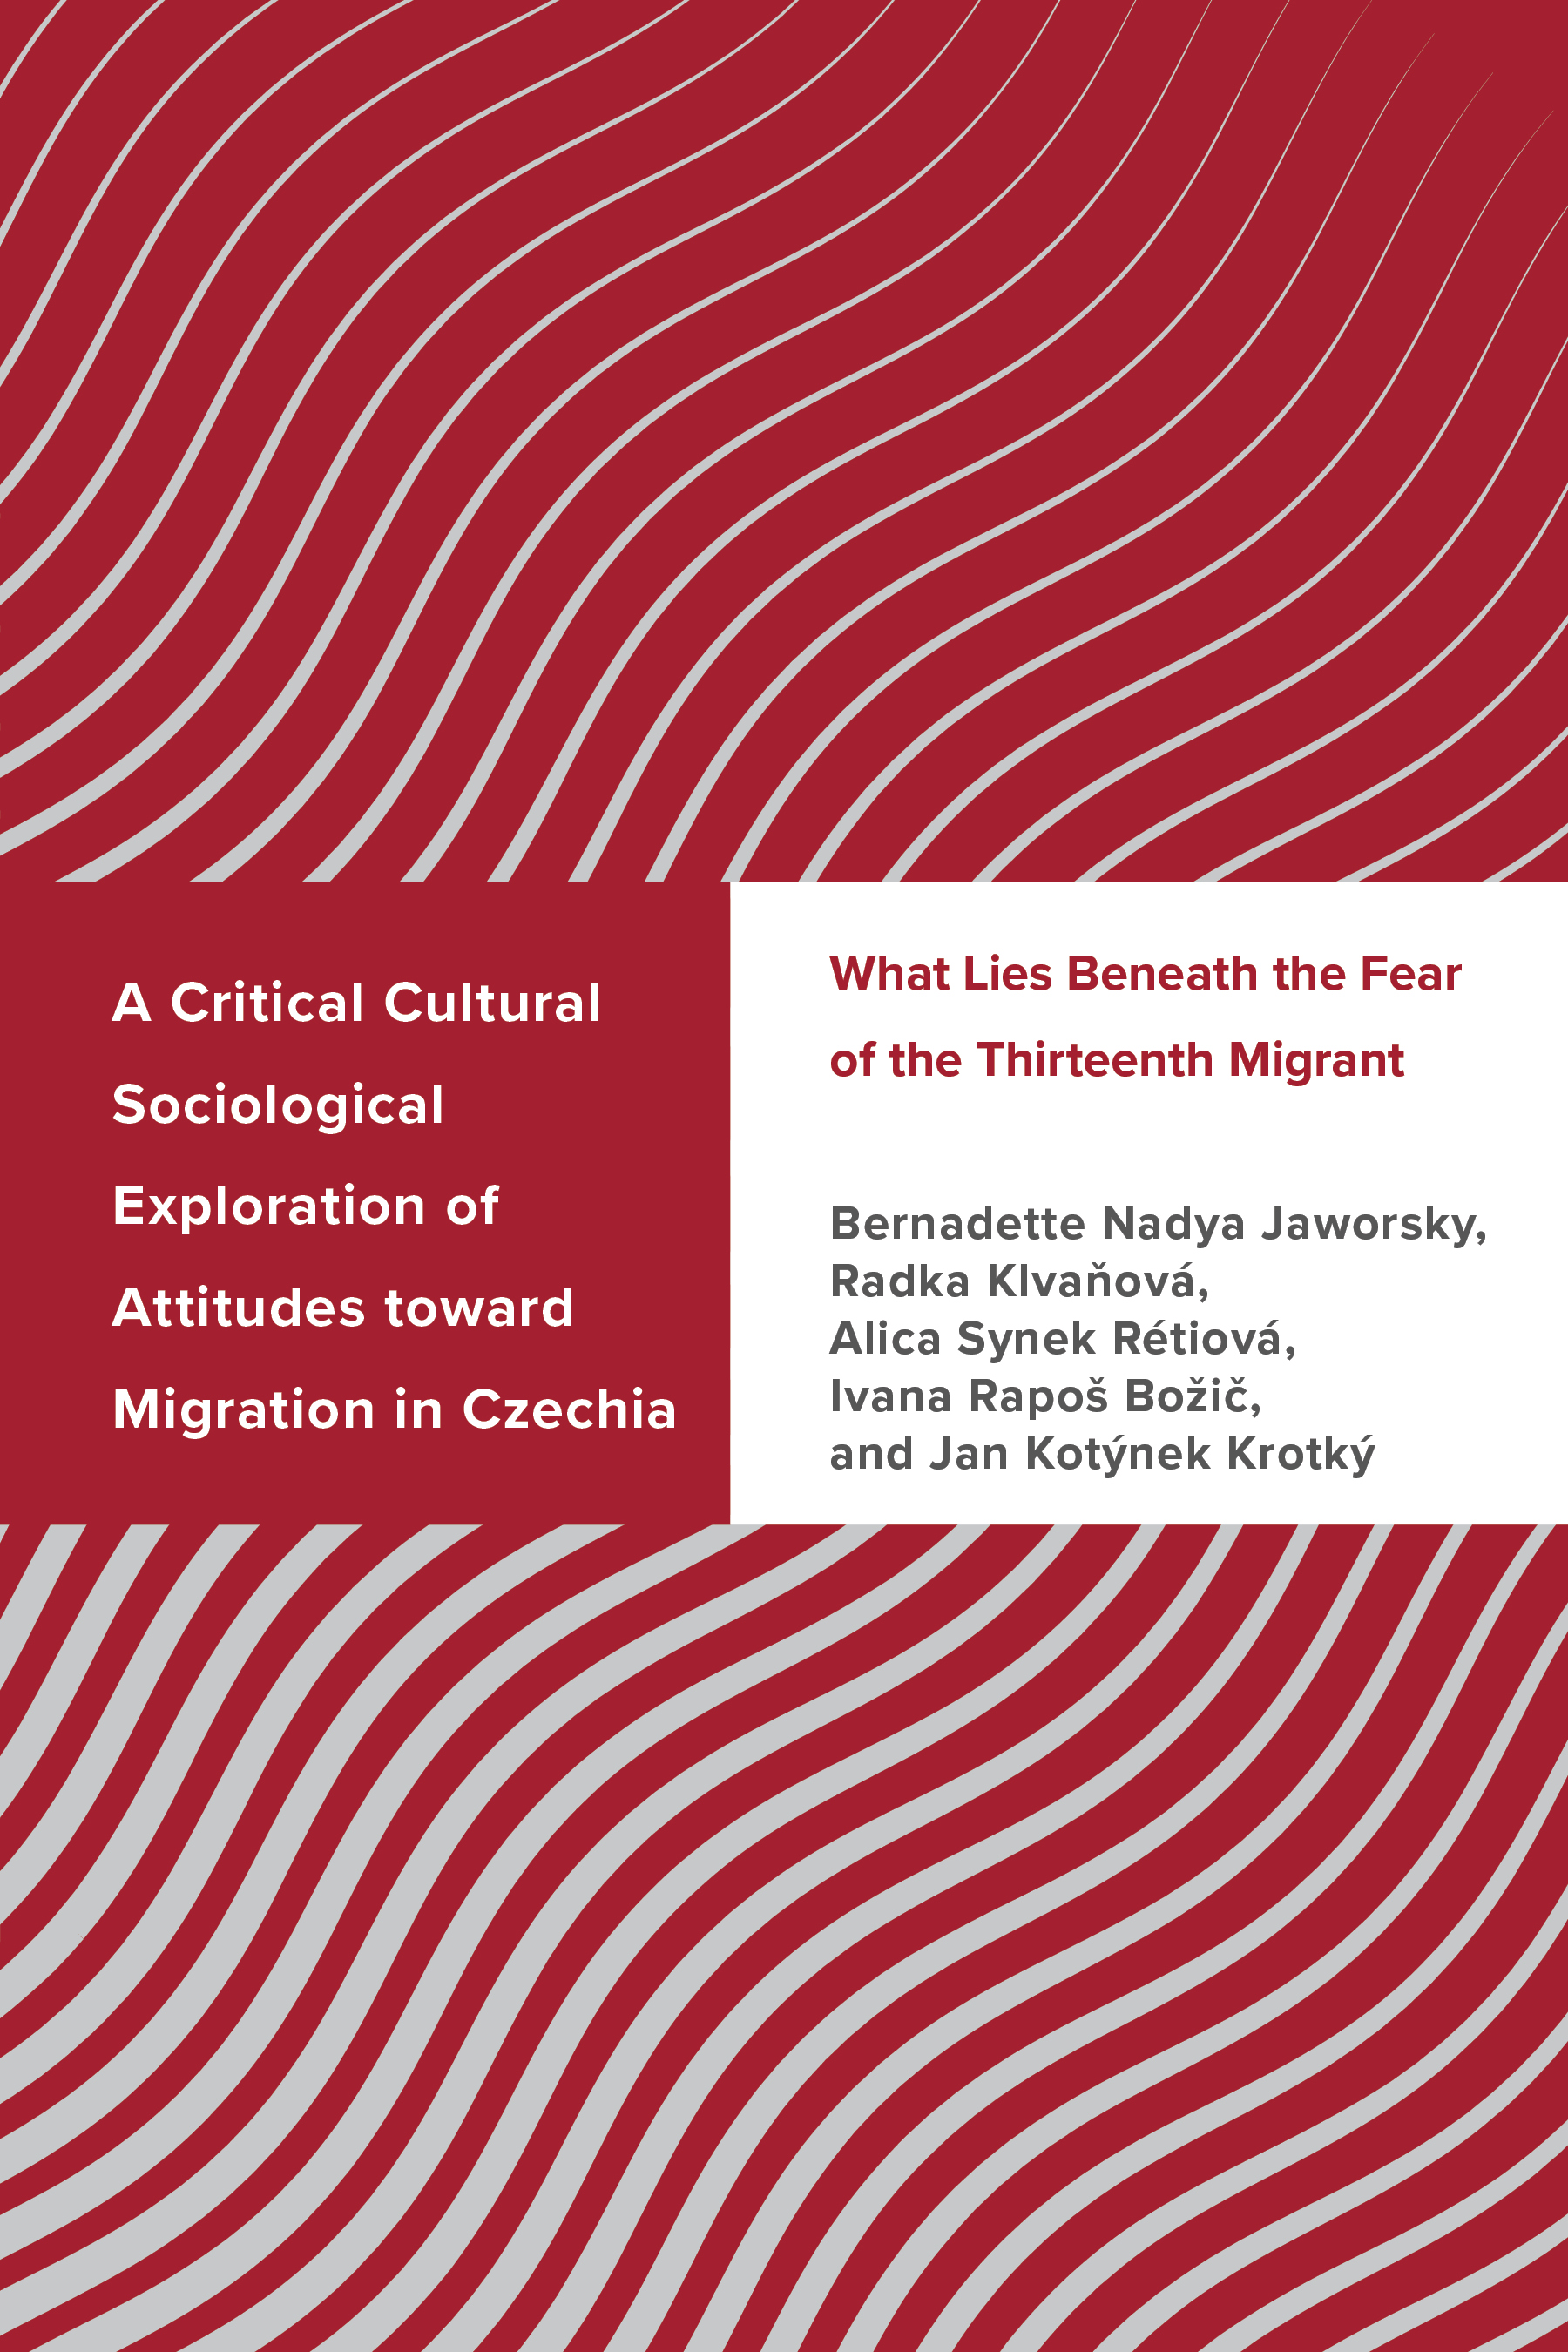 A Critical Cultural Sociological Exploration of Attitudes toward Migration in Czechia: What Lies Beneath the Fear of the Thirteenth Migrant